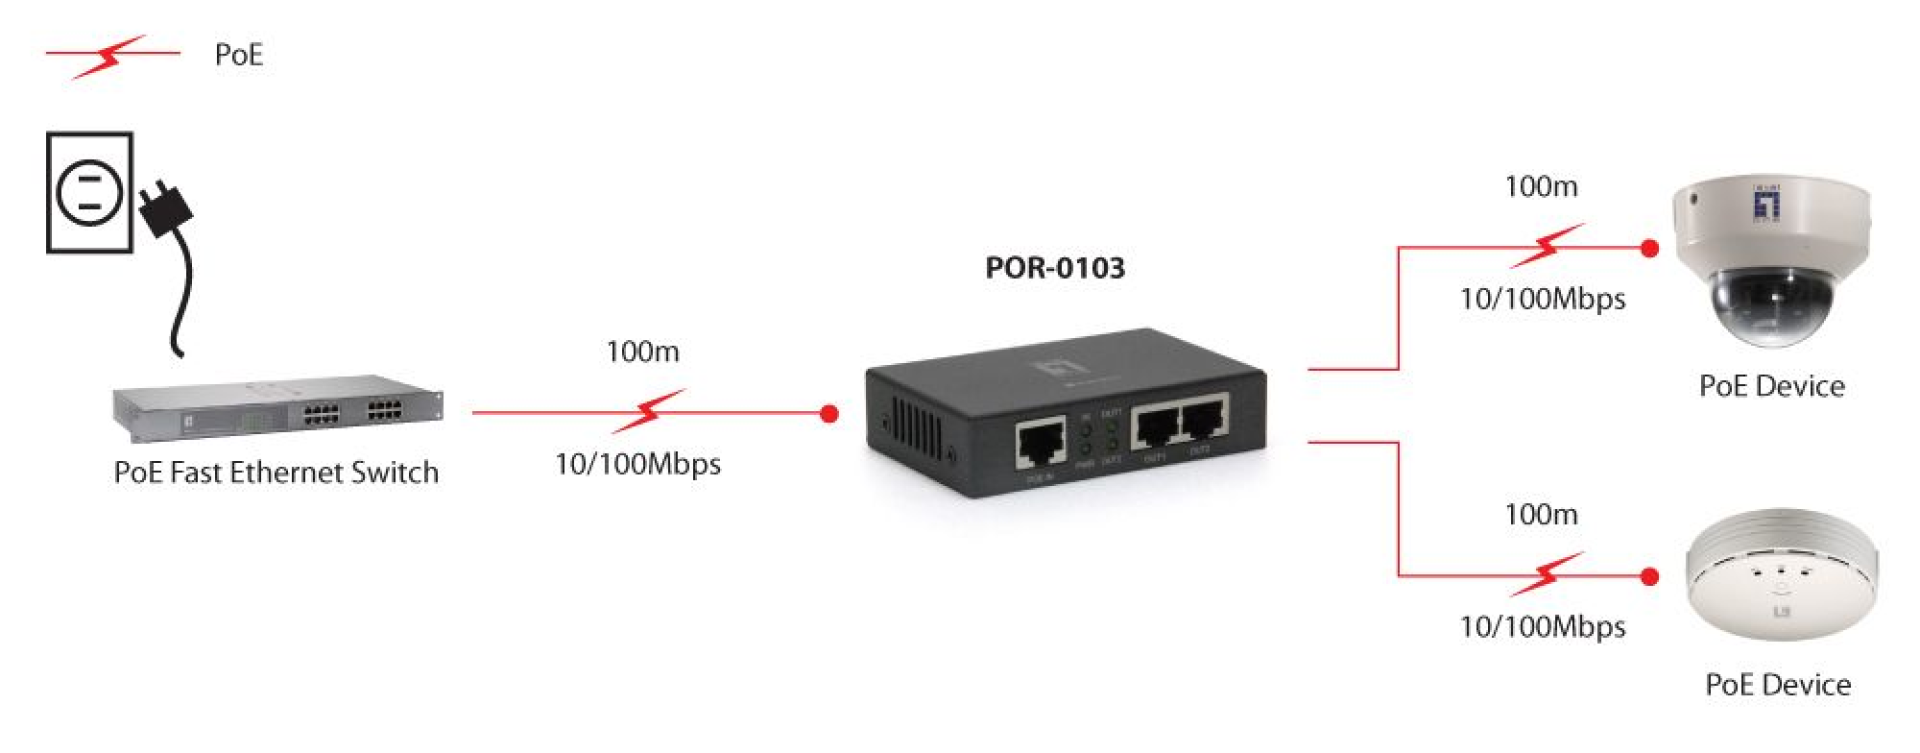 PoE-Repeater 2 PoE-Ports 802.3at/af PoE